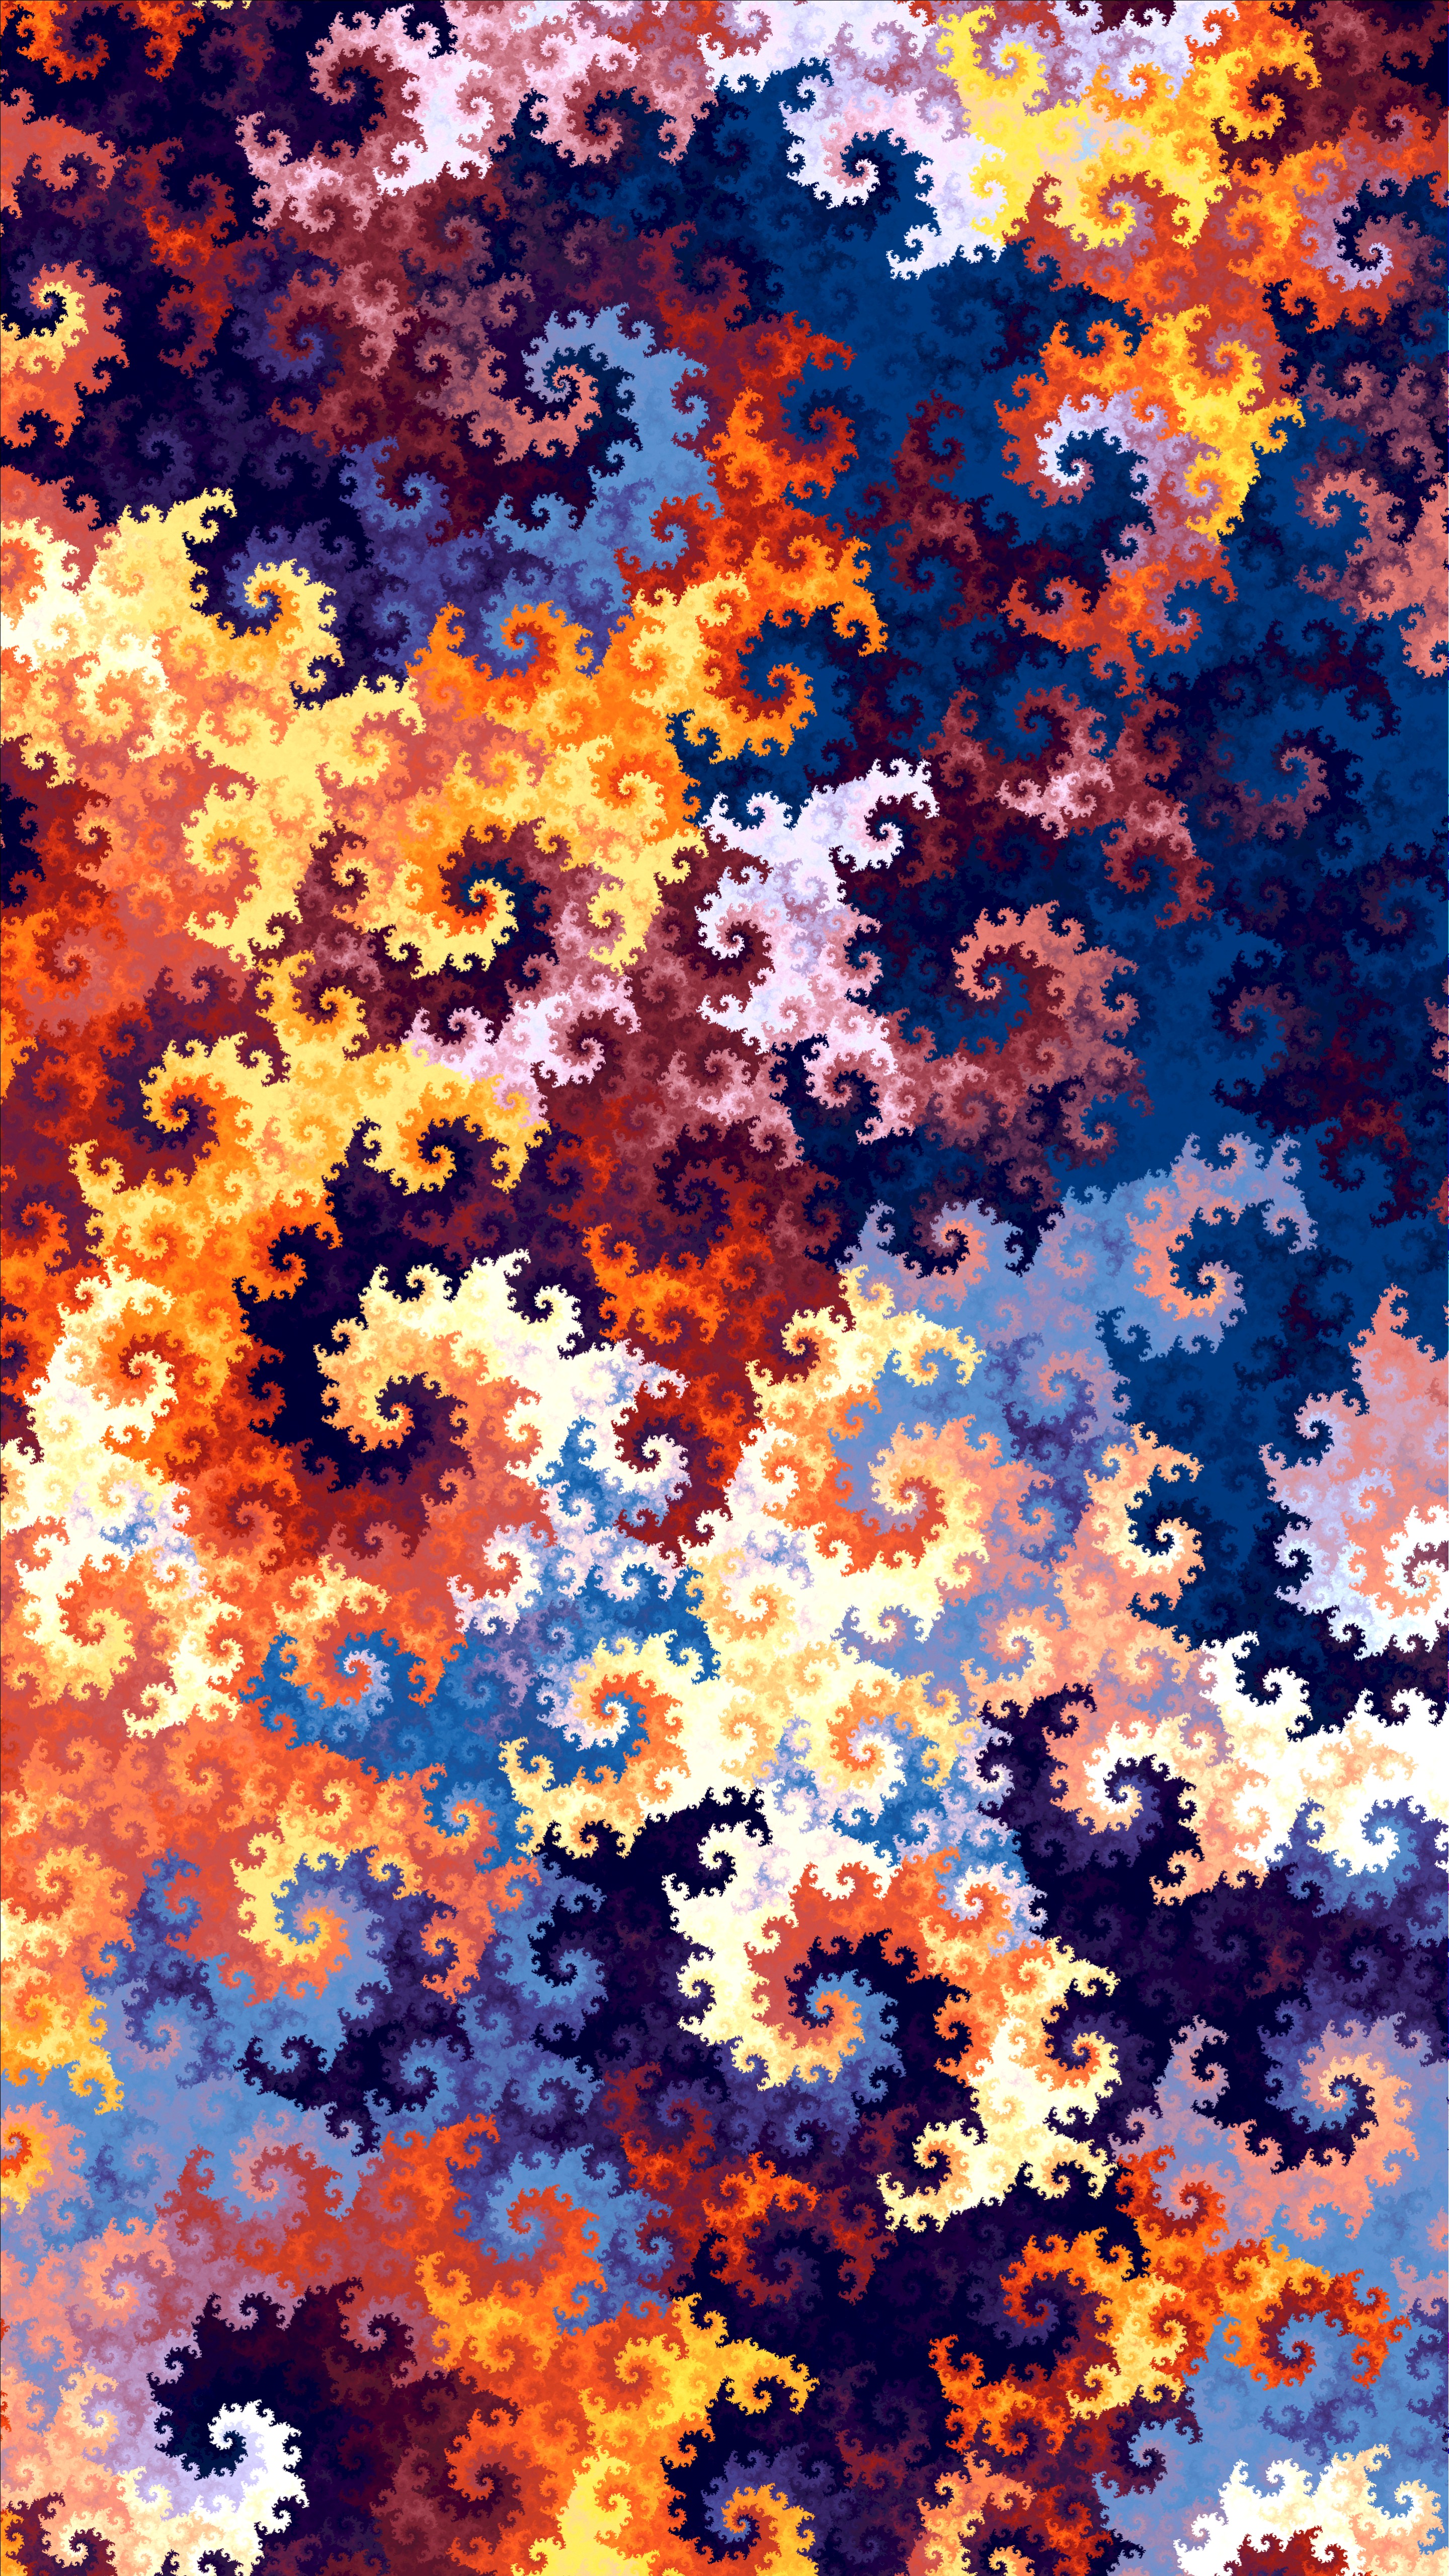 multicolored, swirling, texture, patterns, motley, pattern, textures, spiral, spirals, involute